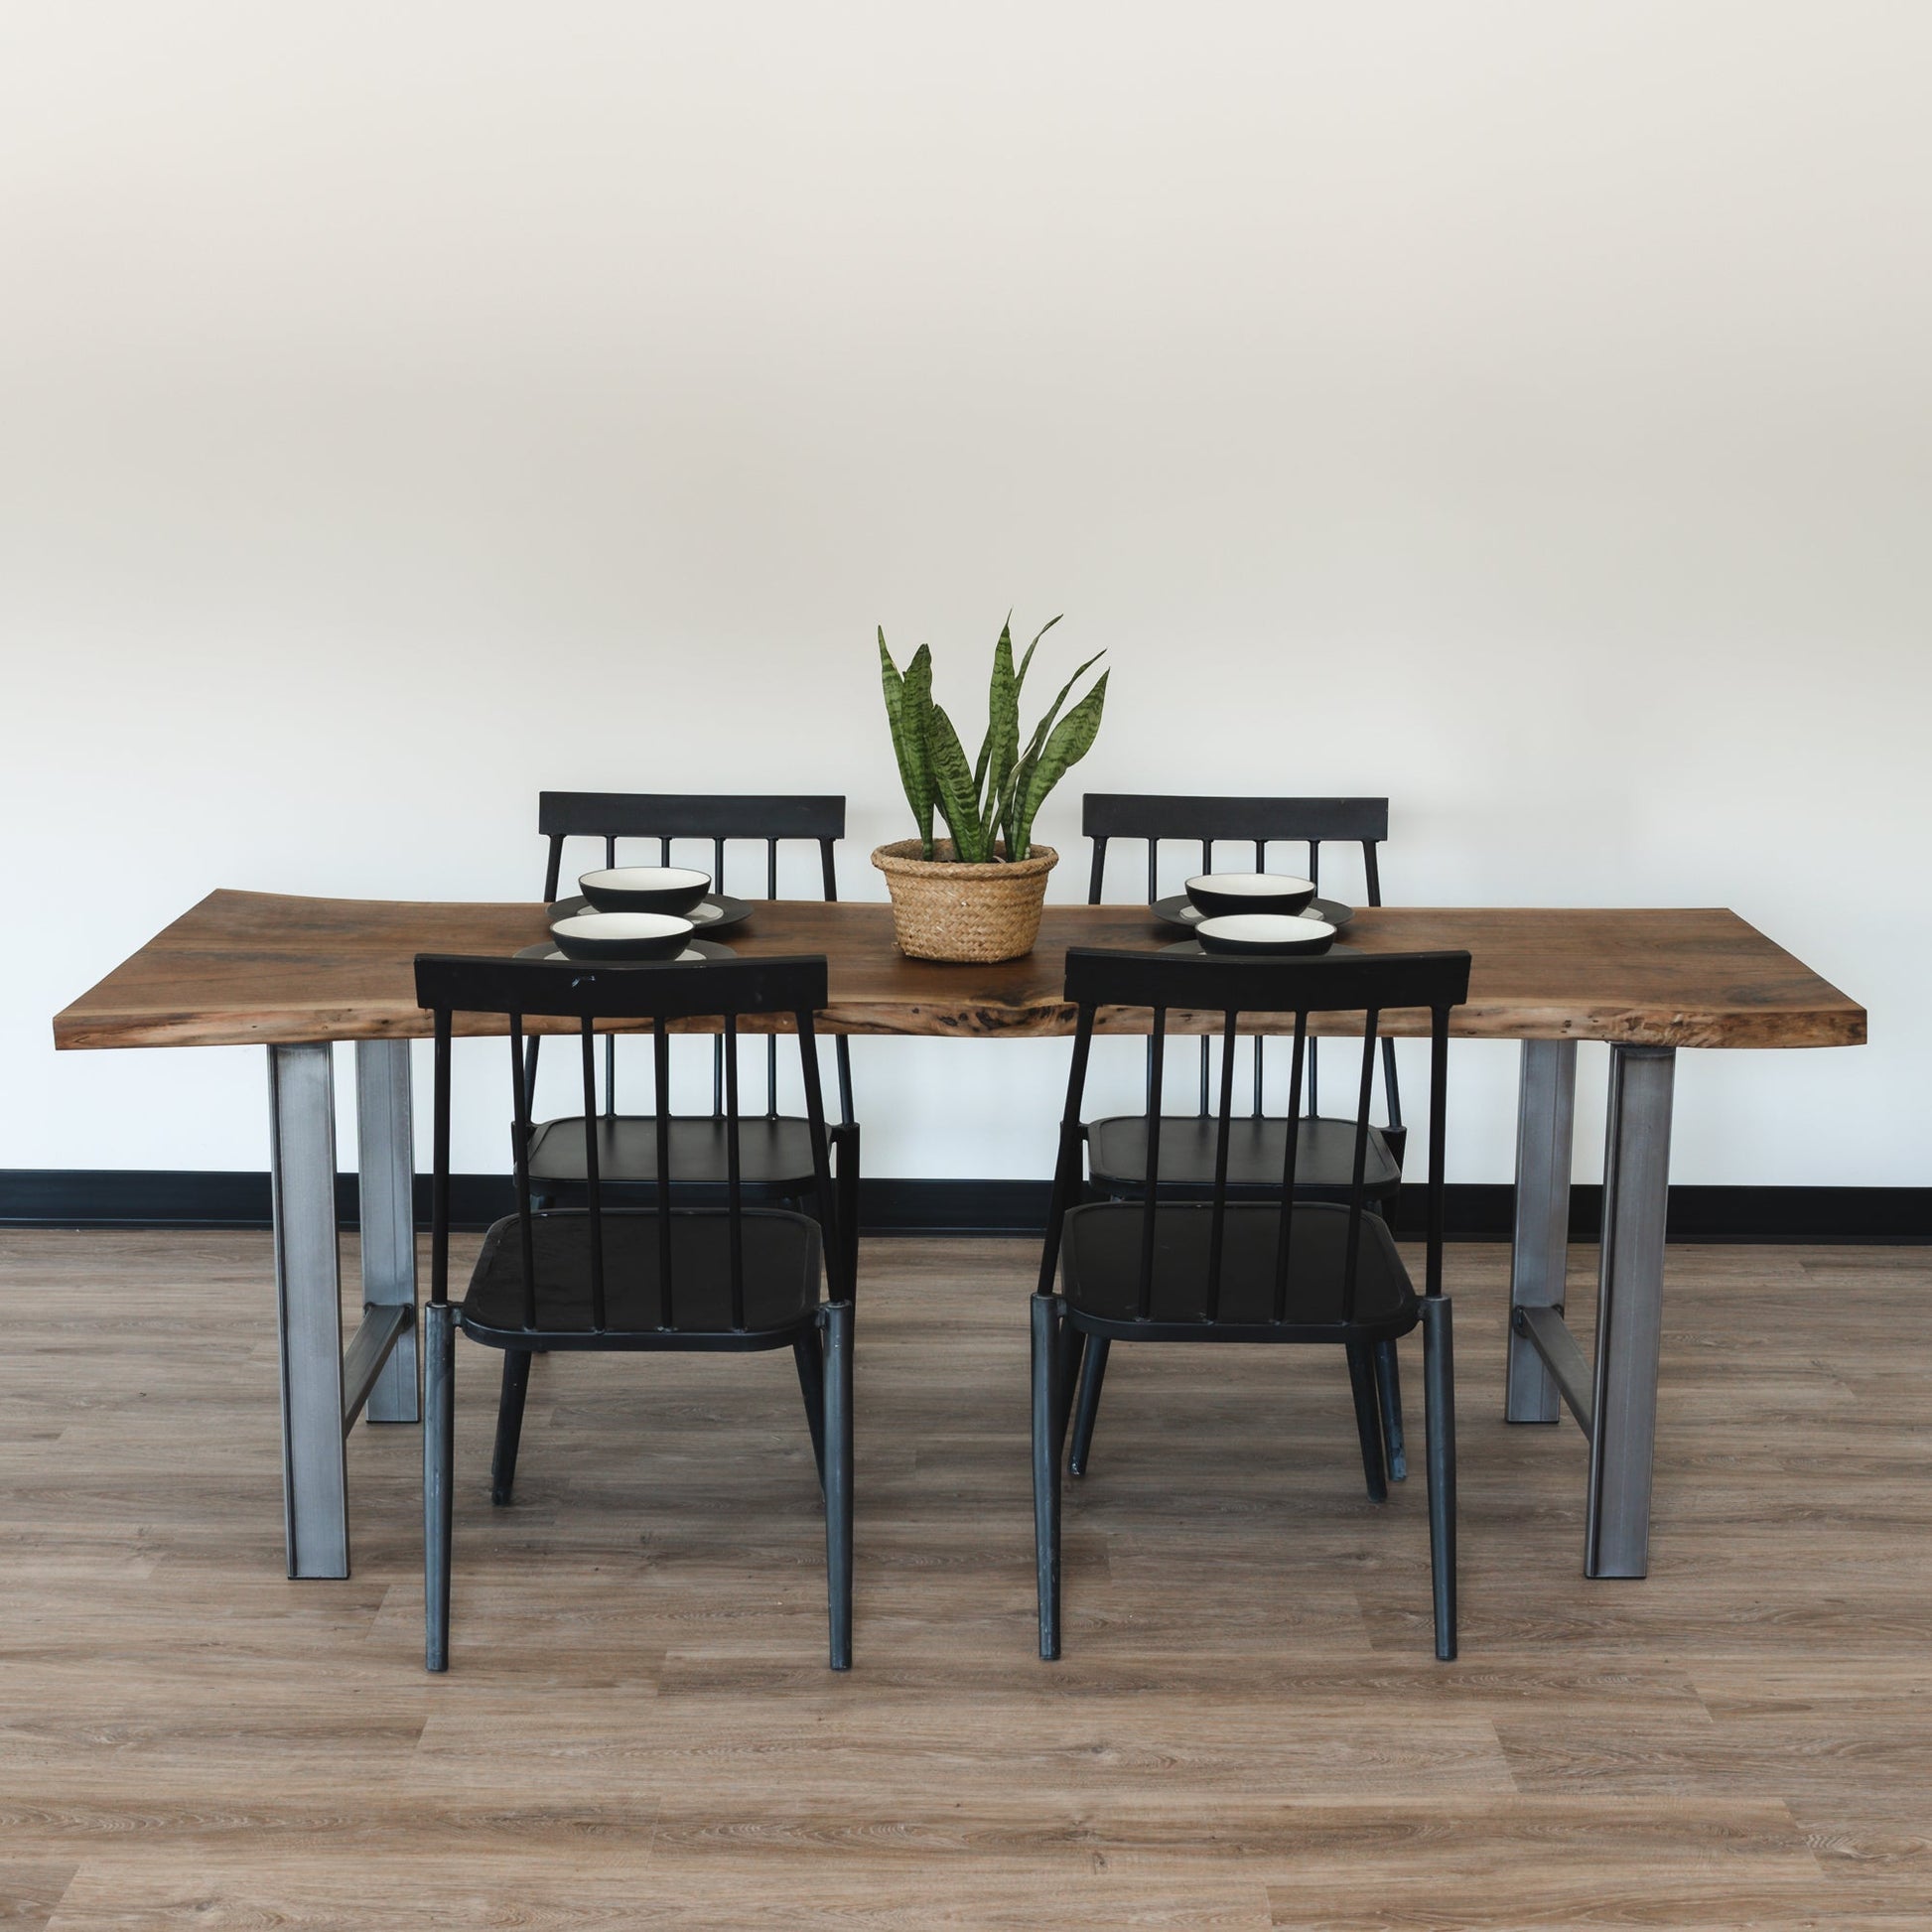 Black Walnut Live Edge H-Shaped Dining Table - FargoWoodworks